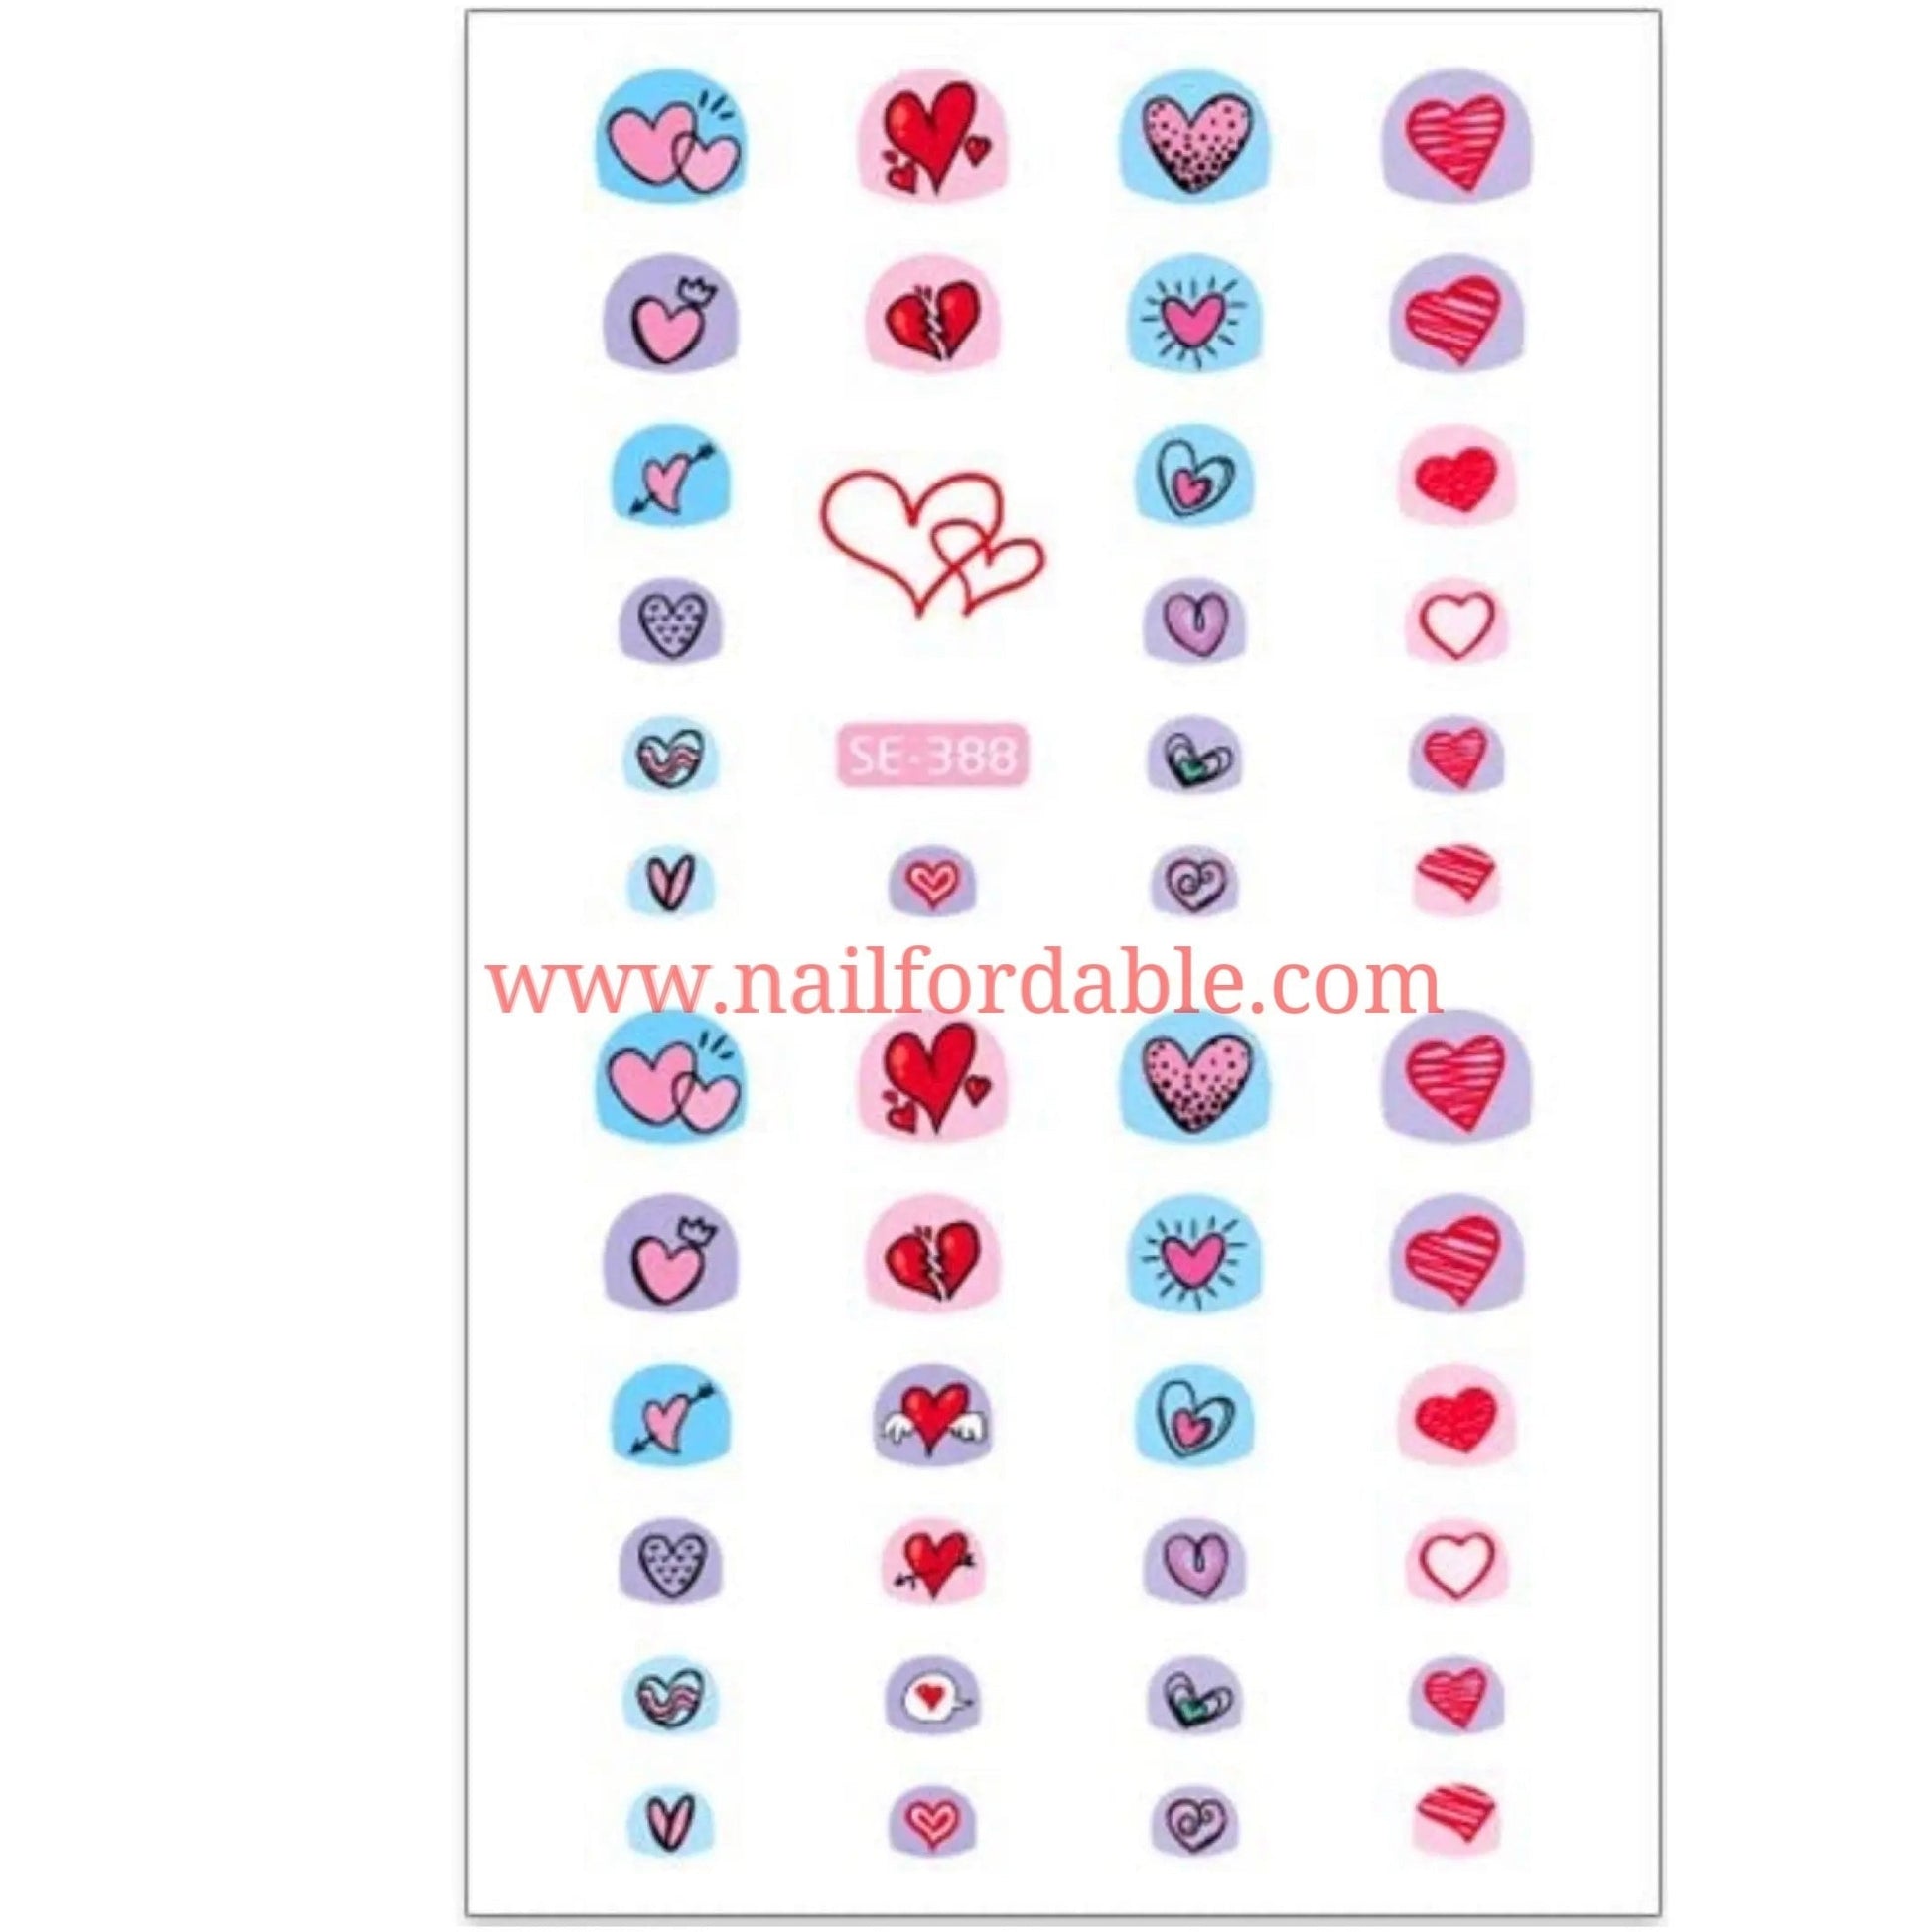 Hearts Nail Stickers Nail Wraps | Semi Cured Gel Wraps | Gel Nail Wraps |Nail Polish | Nail Stickers